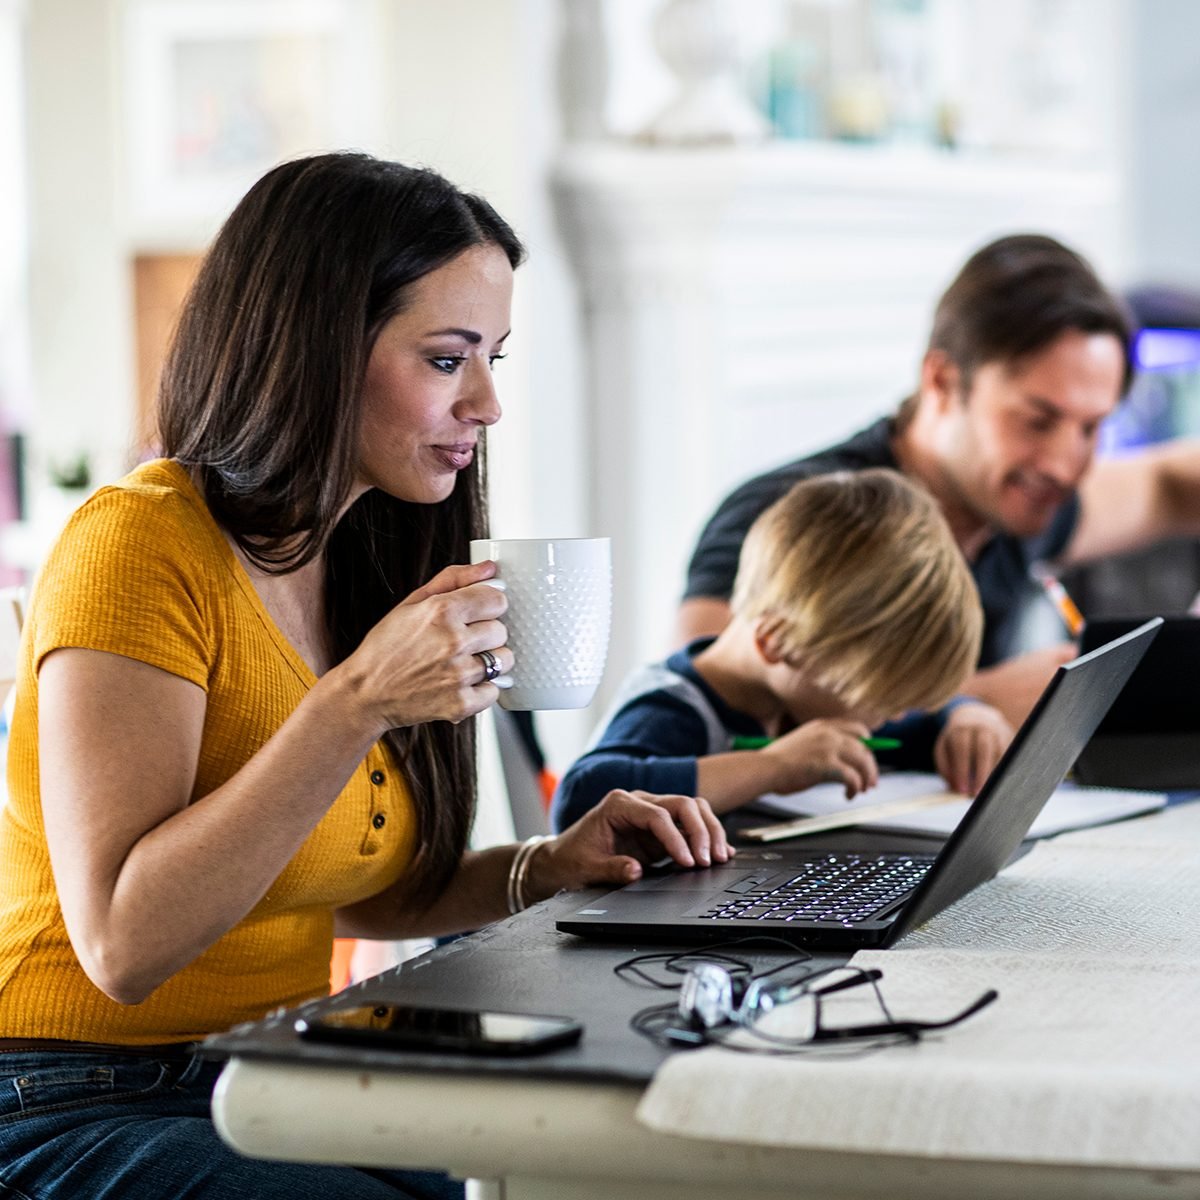 Mother Working From Home While Children Attend School Online